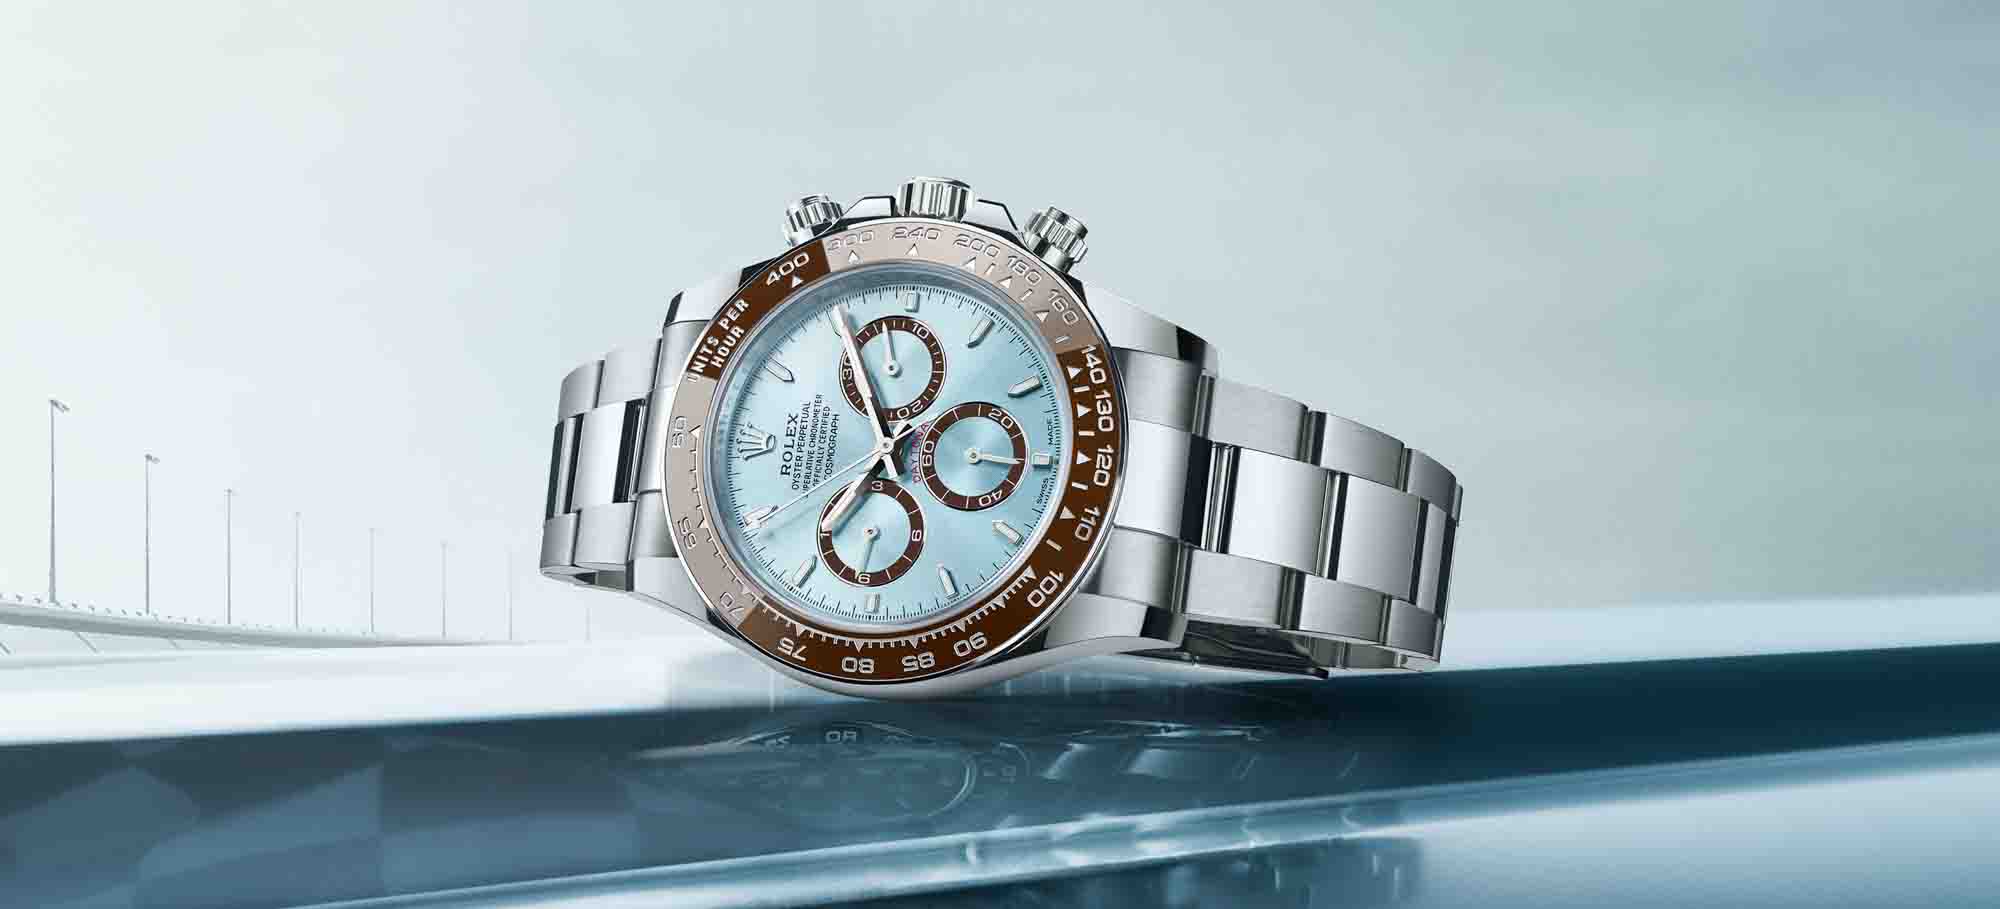 Rolex Unveils New Cosmograph Daytona Watches To Celebrate The Collection's 60th | aBlogtoWatch